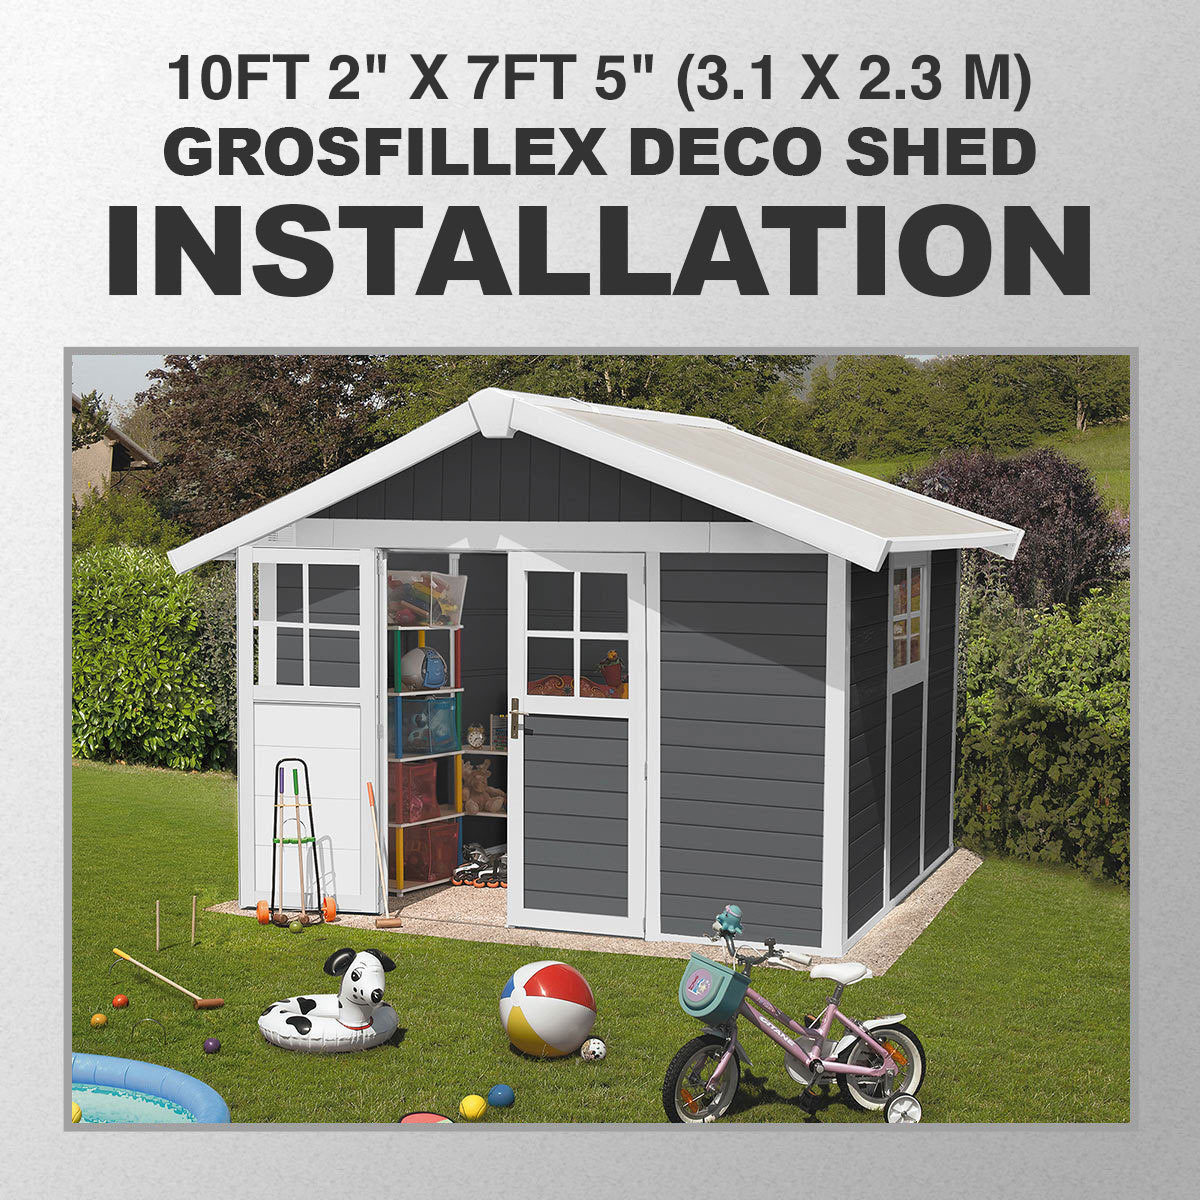 Installation for Grosfillex Deco 10ft 2" x 7ft 5" (3.1 x 2.3 m) Shed in 2 Colours - Model Deco 7.5